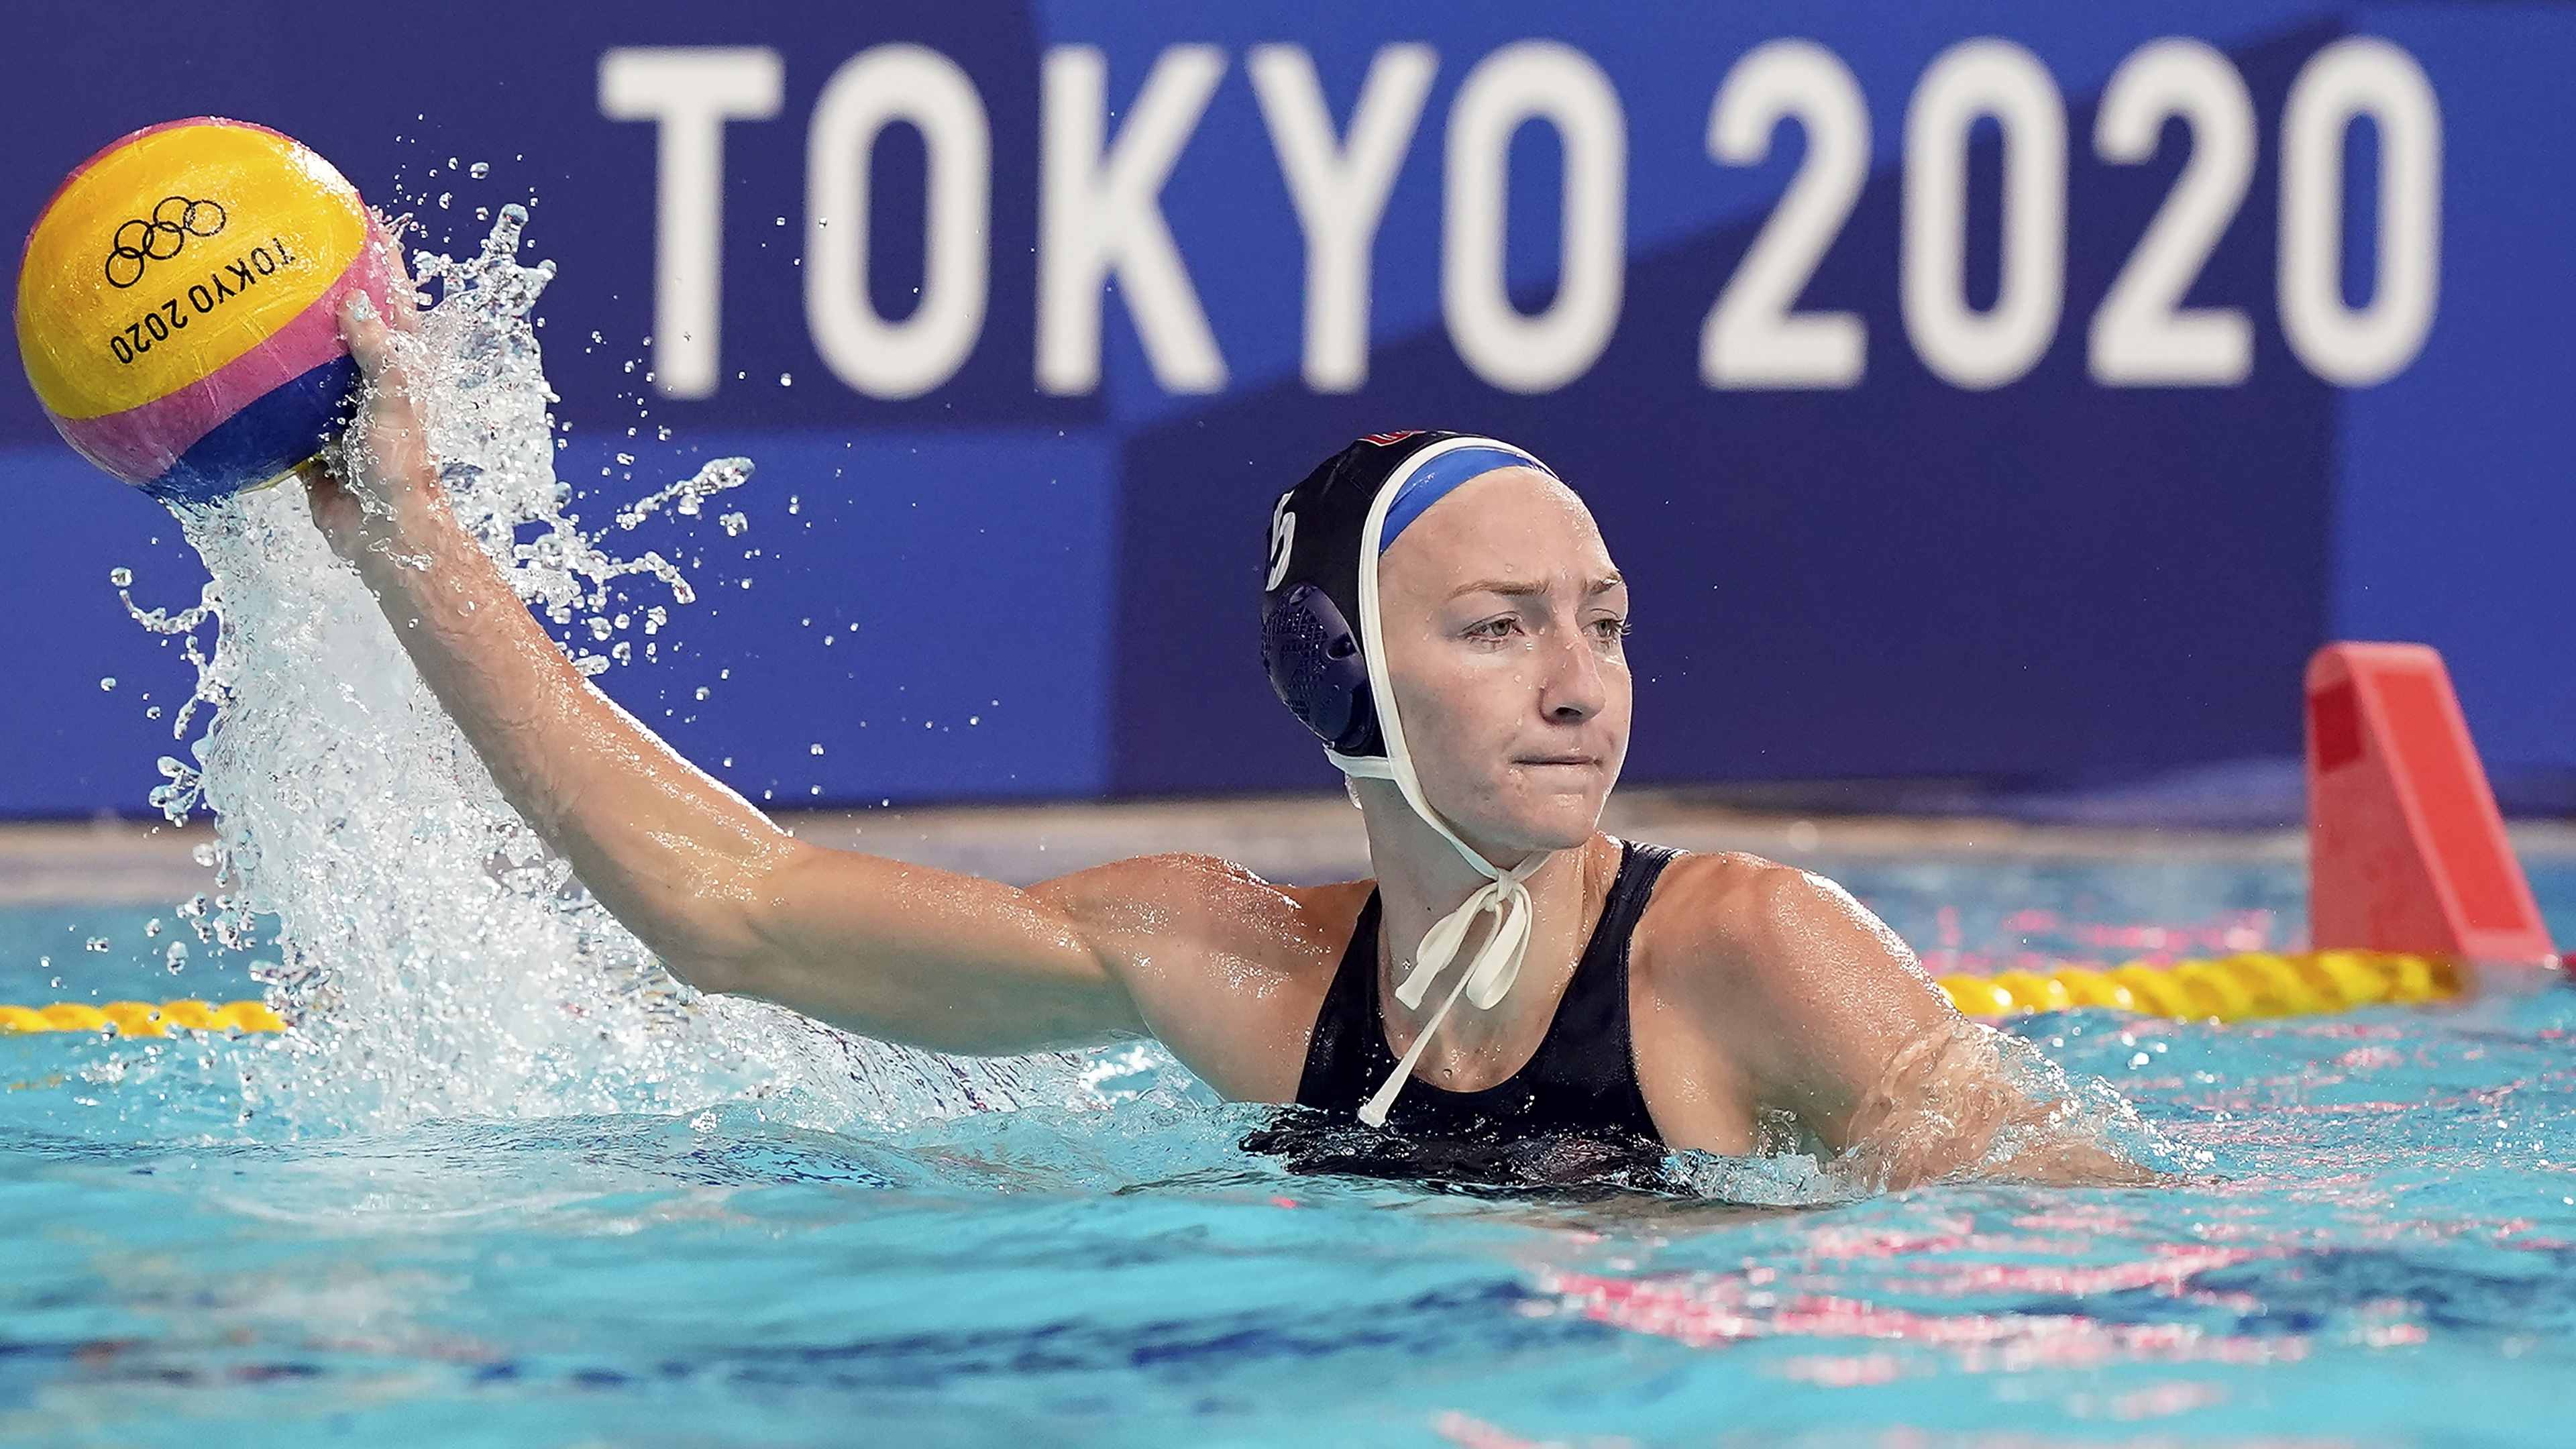 Water Polo: Paige Hauschild, A member of the United States women's national team, 2020 Tokyo Summer Olympics gold medalist. 3840x2160 4K Background.